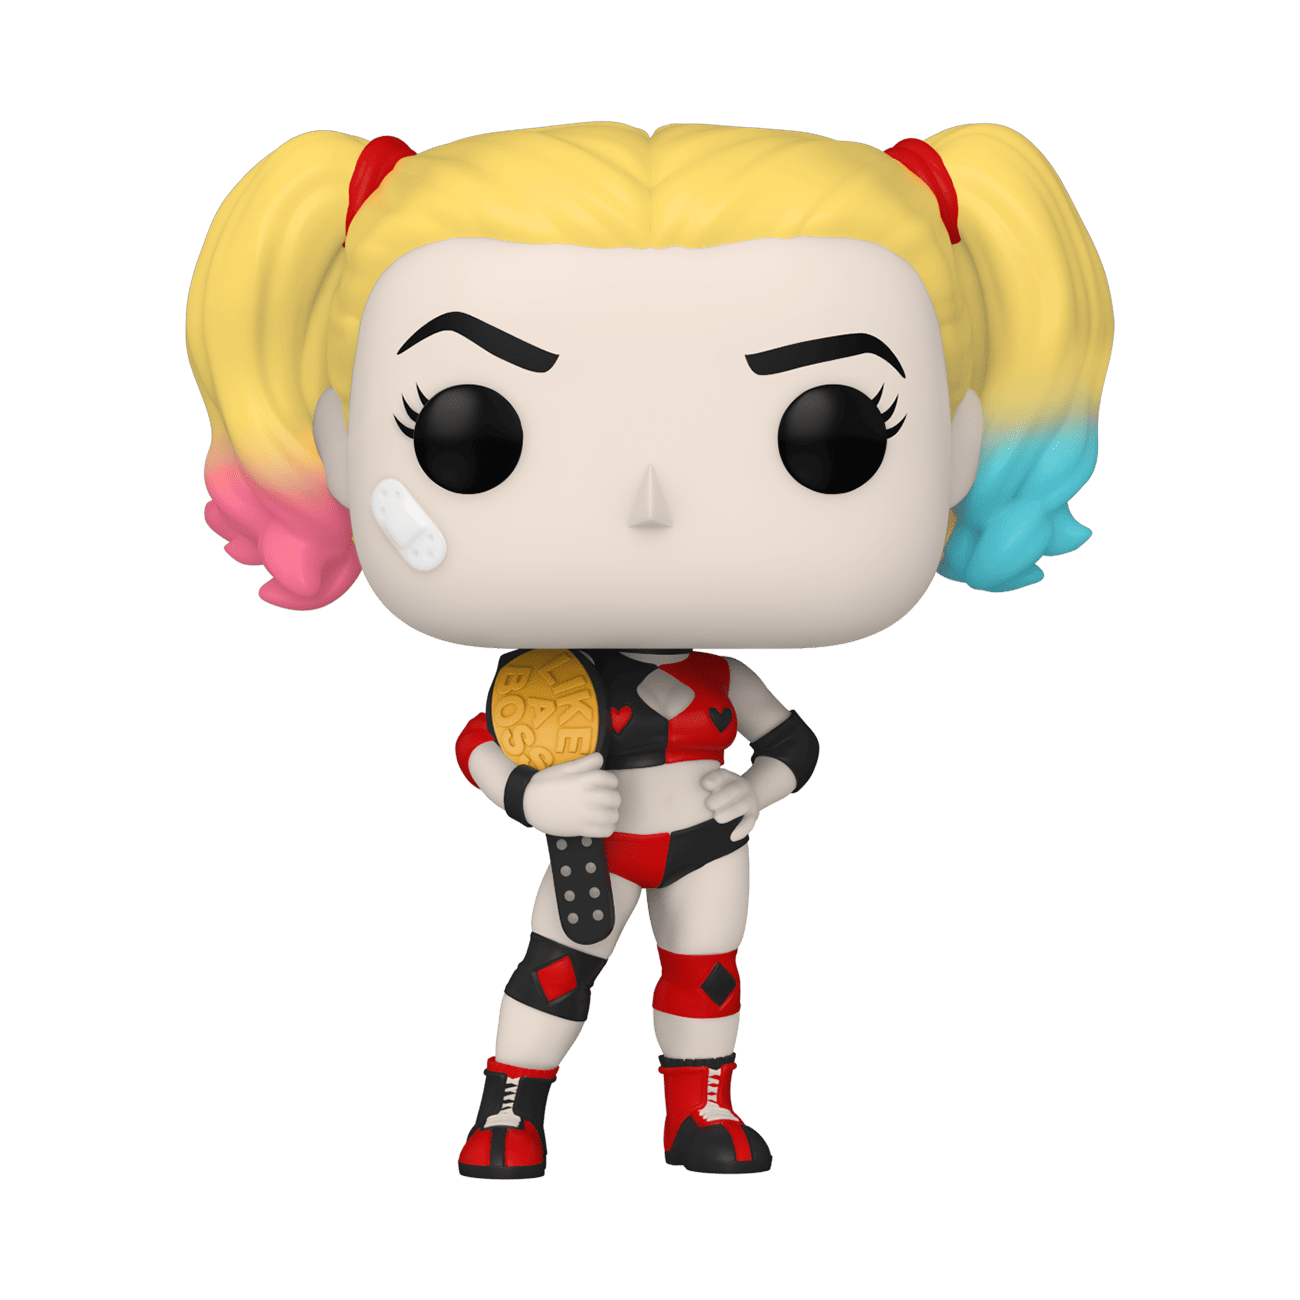 Buy Pop! Quinn with Belt at Funko.